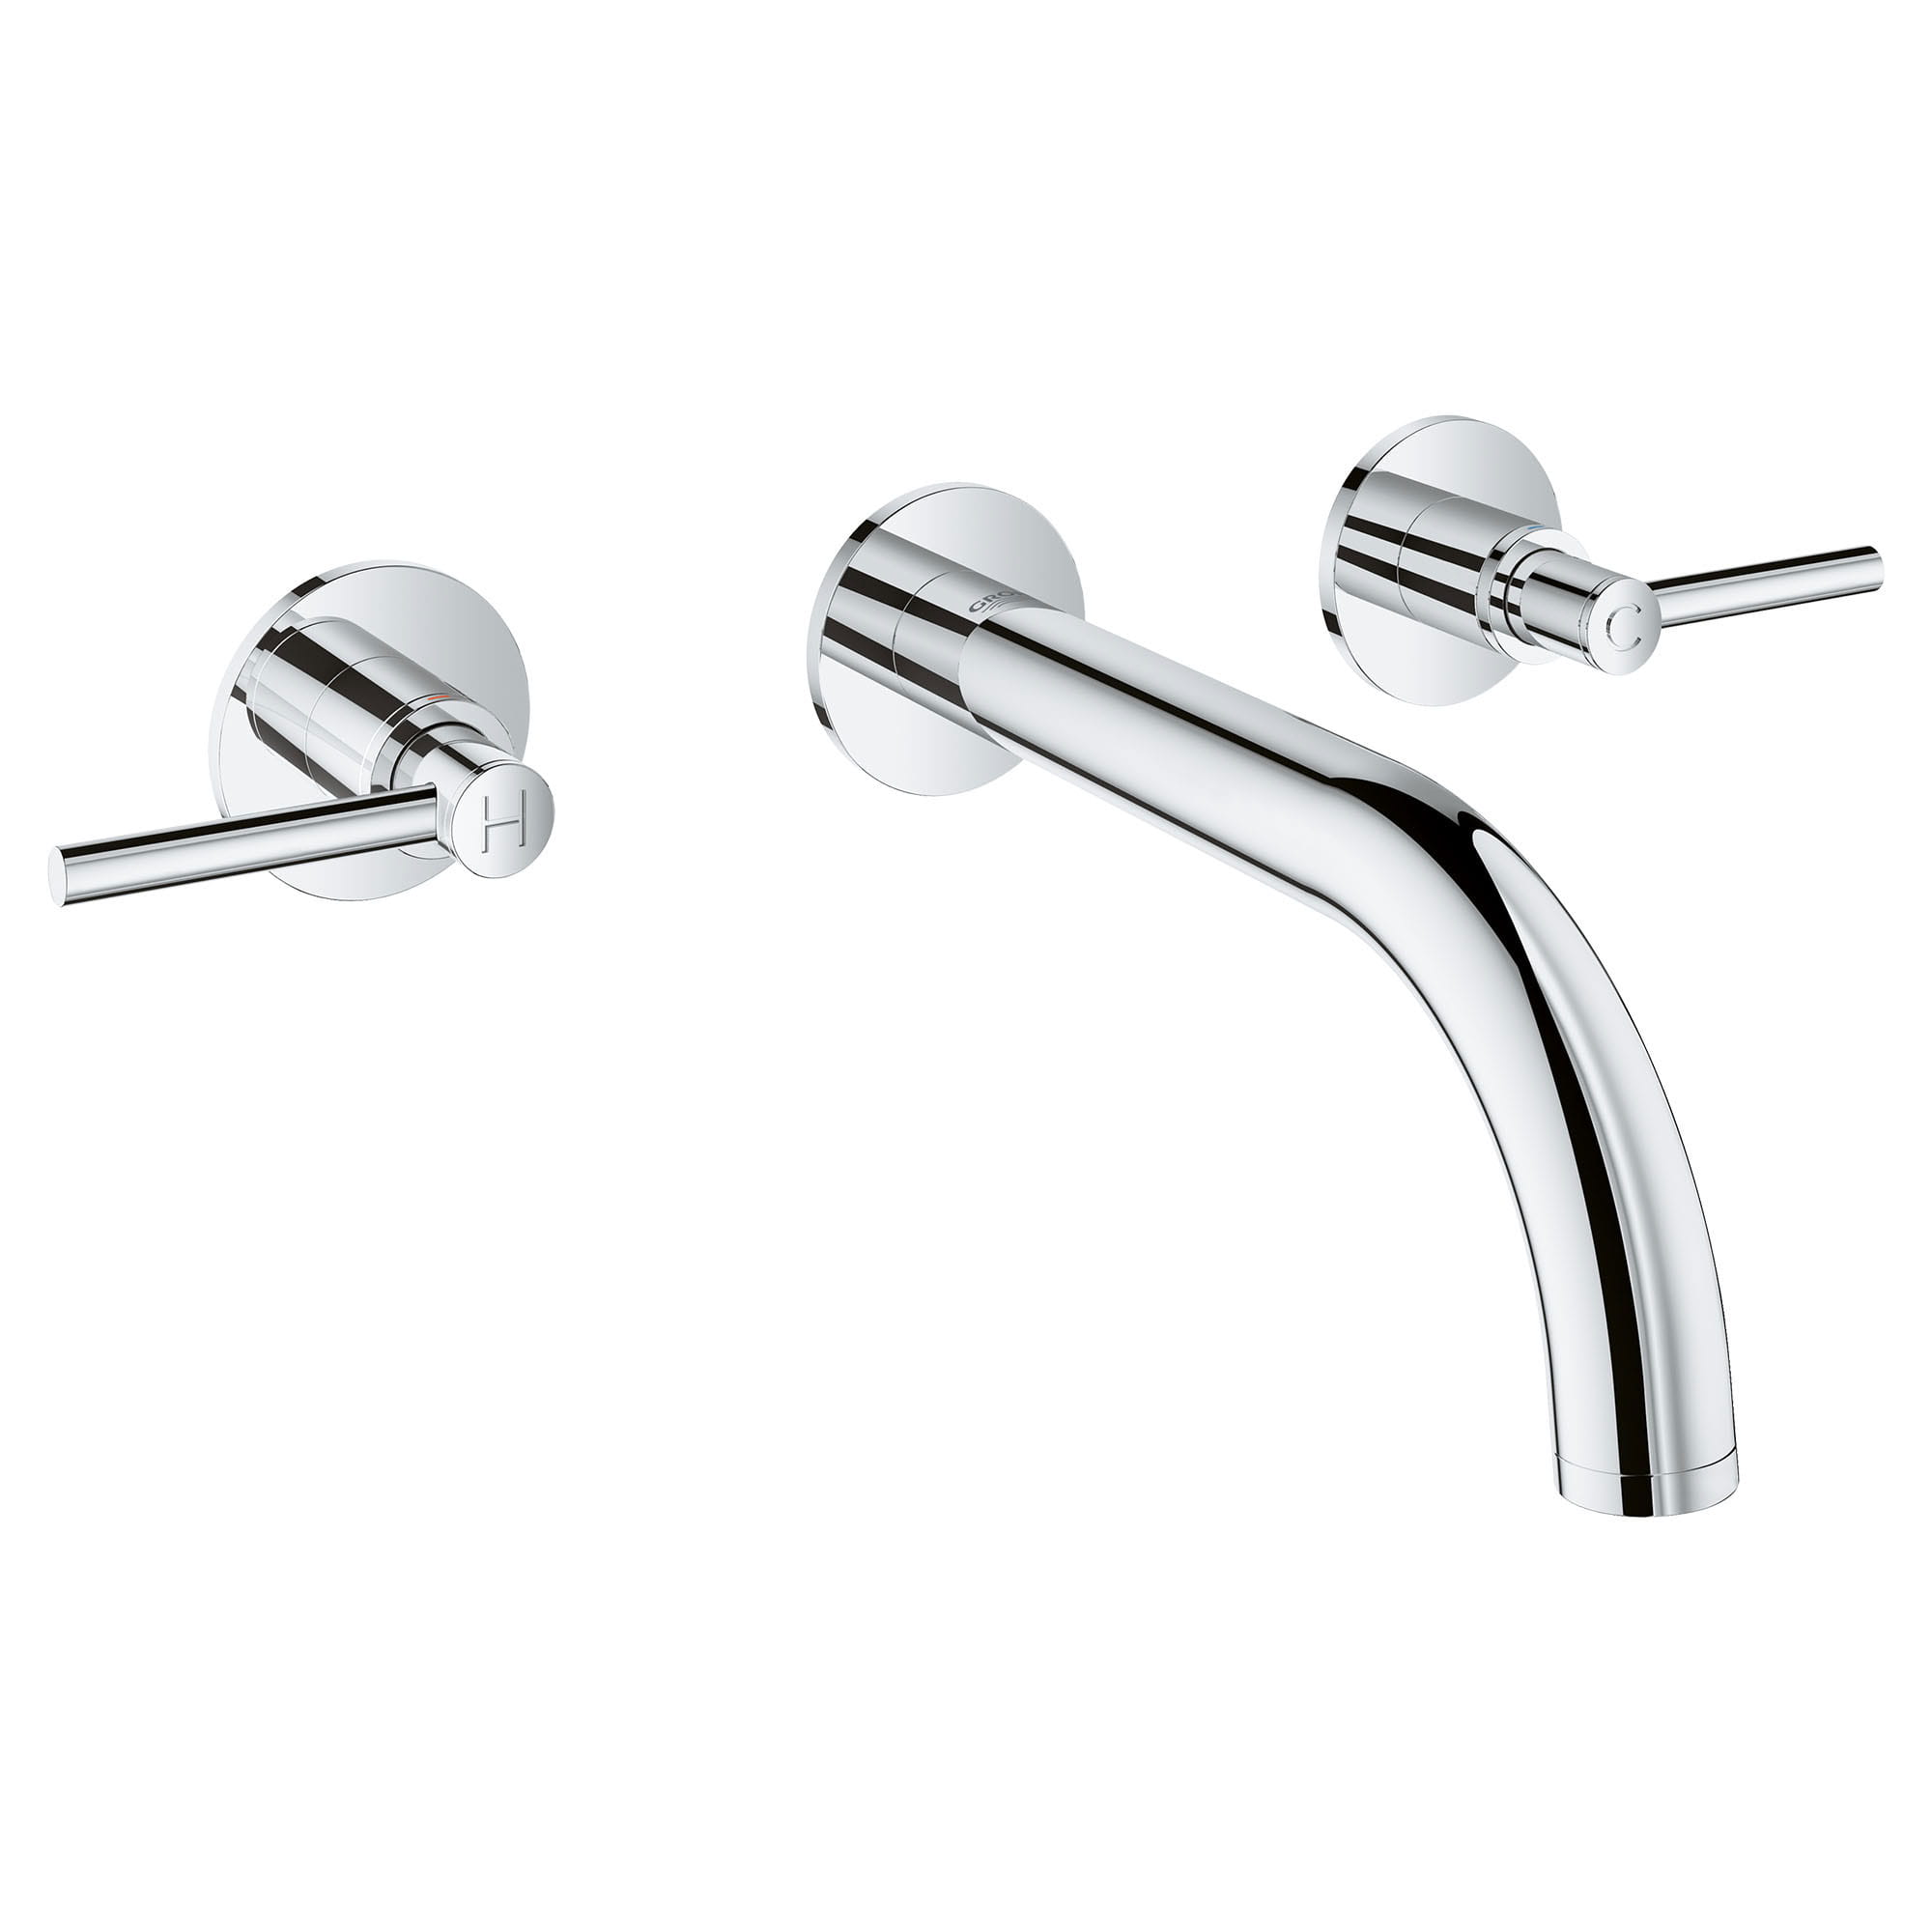 Bathroom Sink Faucets Faucet Grohe 20173003